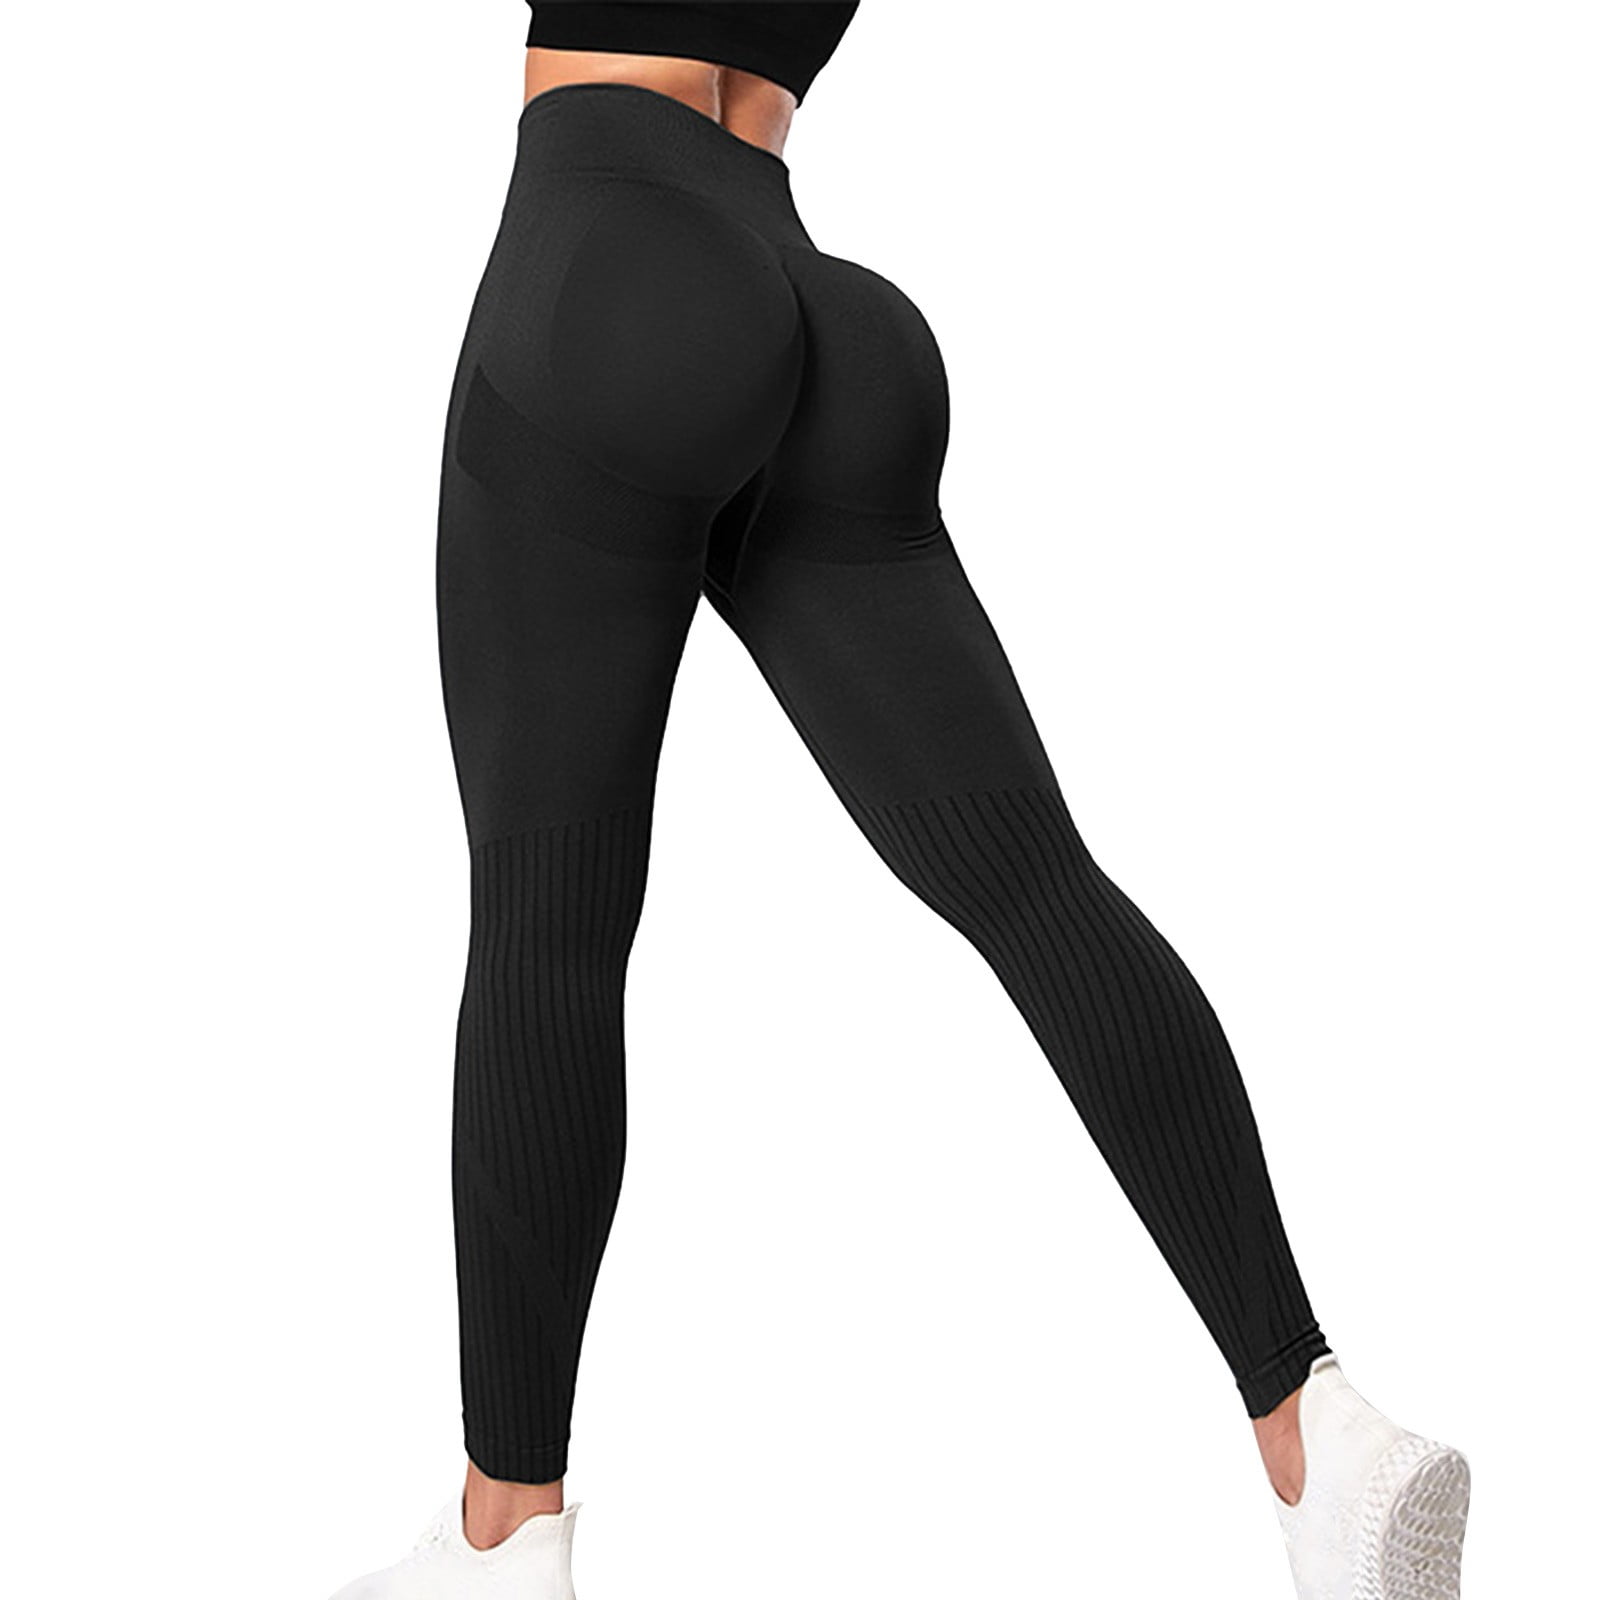 Ramiter Fleece Lined Leggings Workout Leggings for Women- Cotton Gym  Stretch Tummy Control Butt Lifting High Rise Seamless Slim Fit Yoga  Leggings